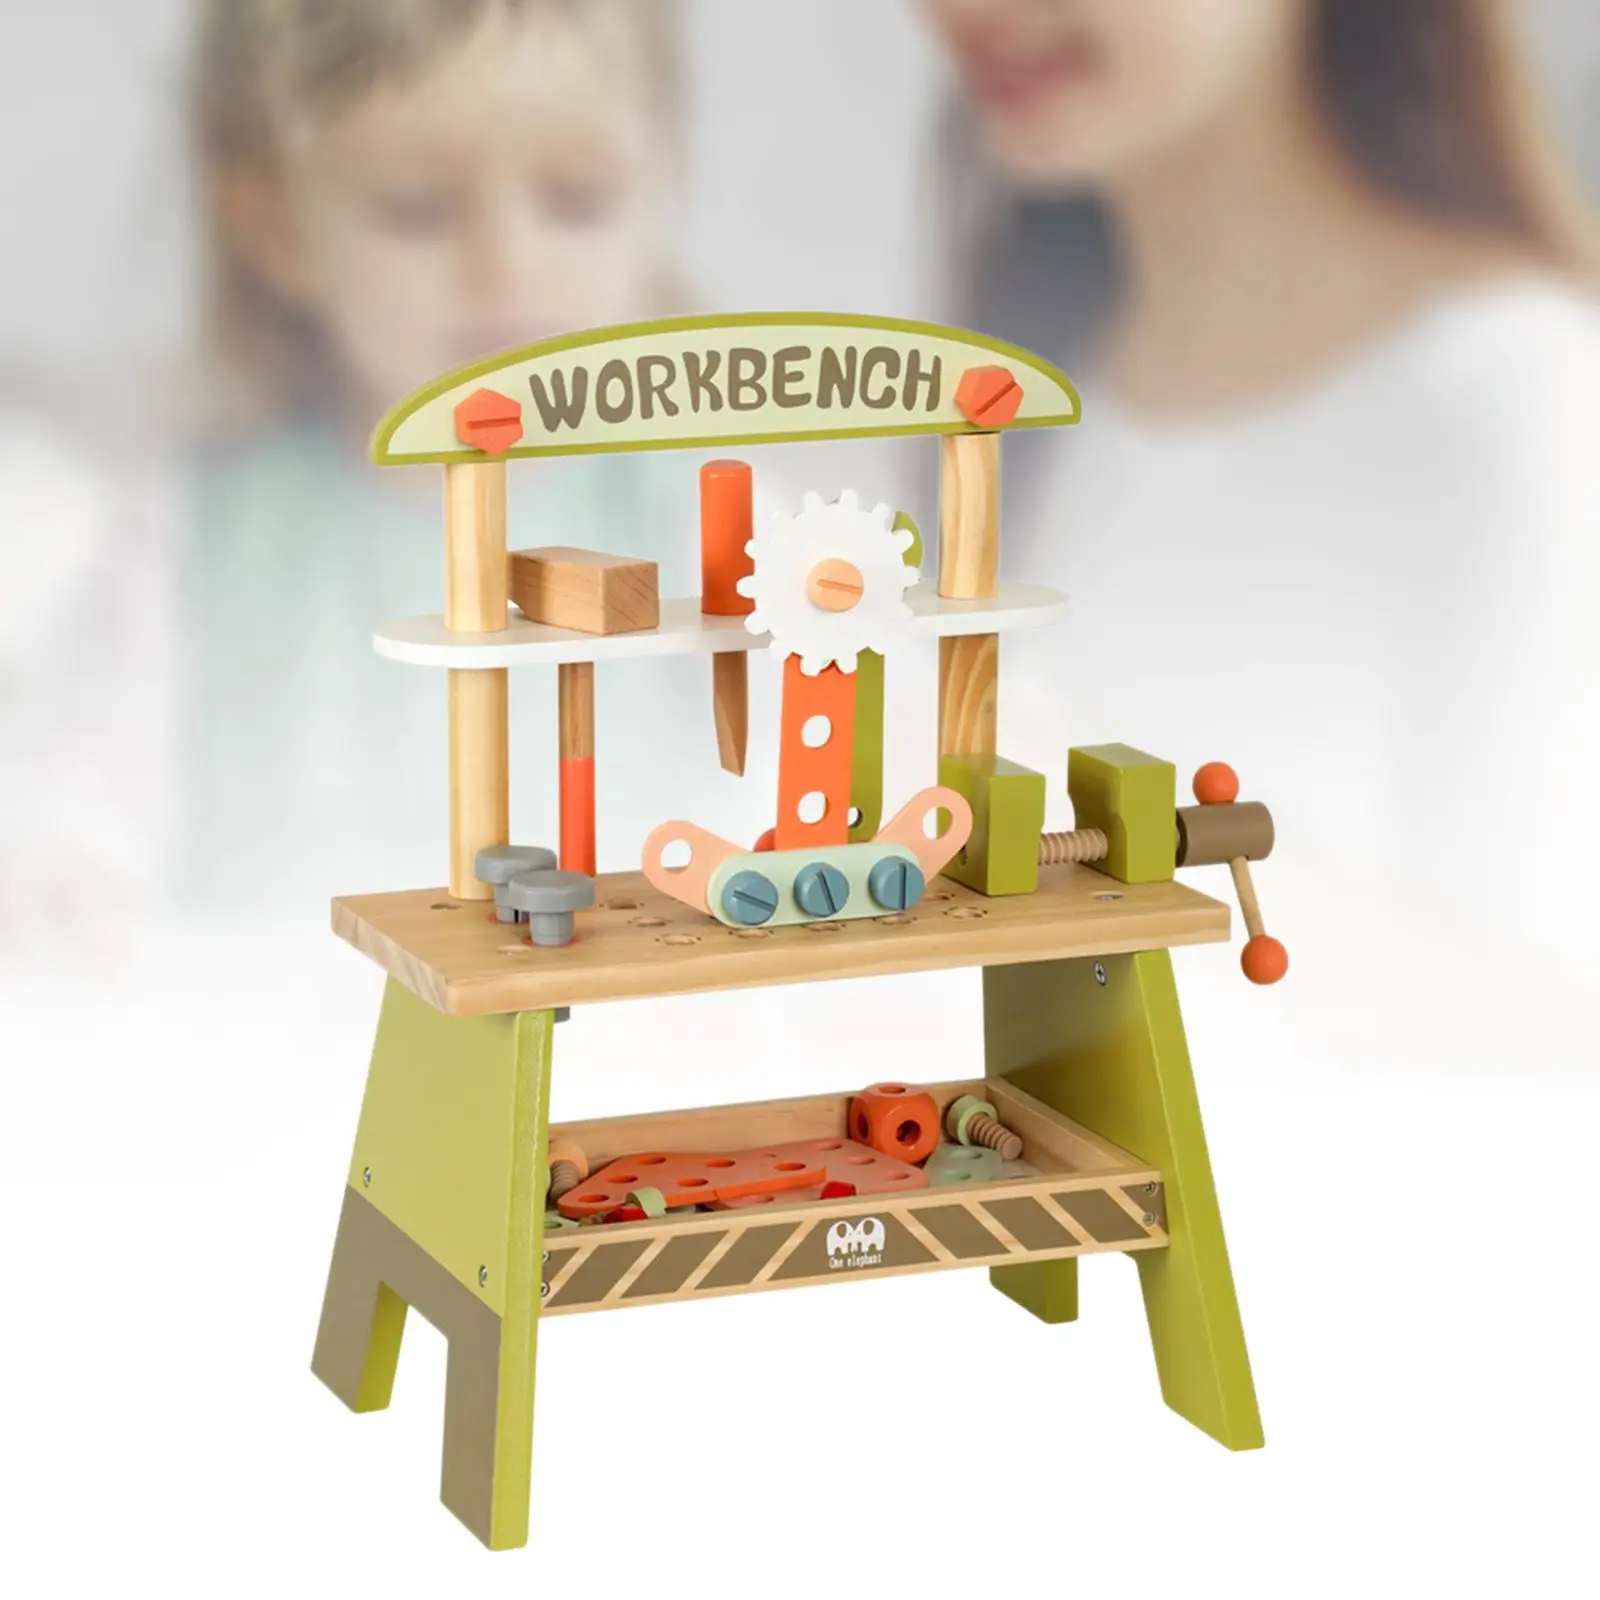 Small Wooden Kid Workbench Toy Simulation Workshop Hand Tool DIY Kid`s Wooden Tool Bench Toy for Ages 3+ Child Holiday Present